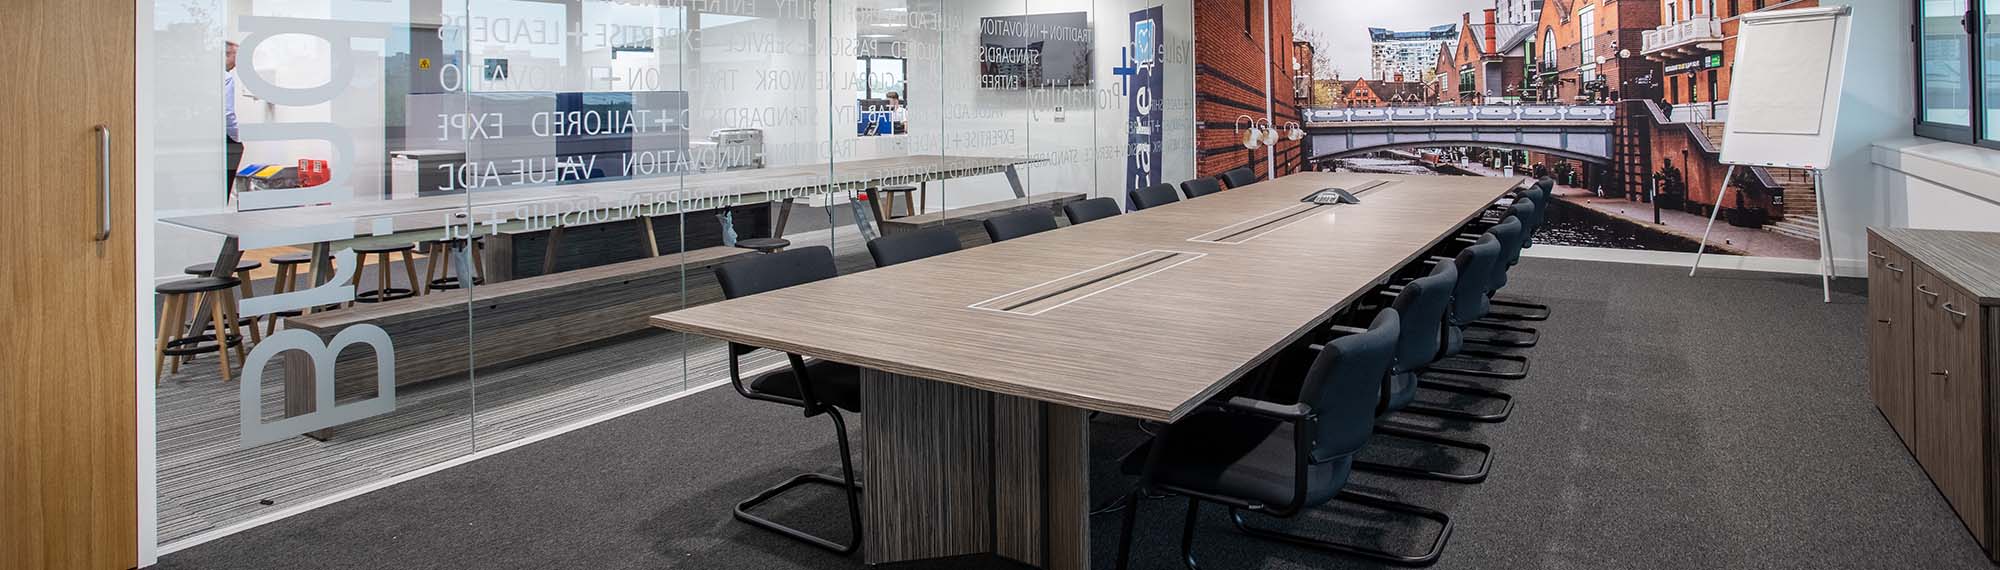 Kuehne Nagel meeting room by Vision Projects